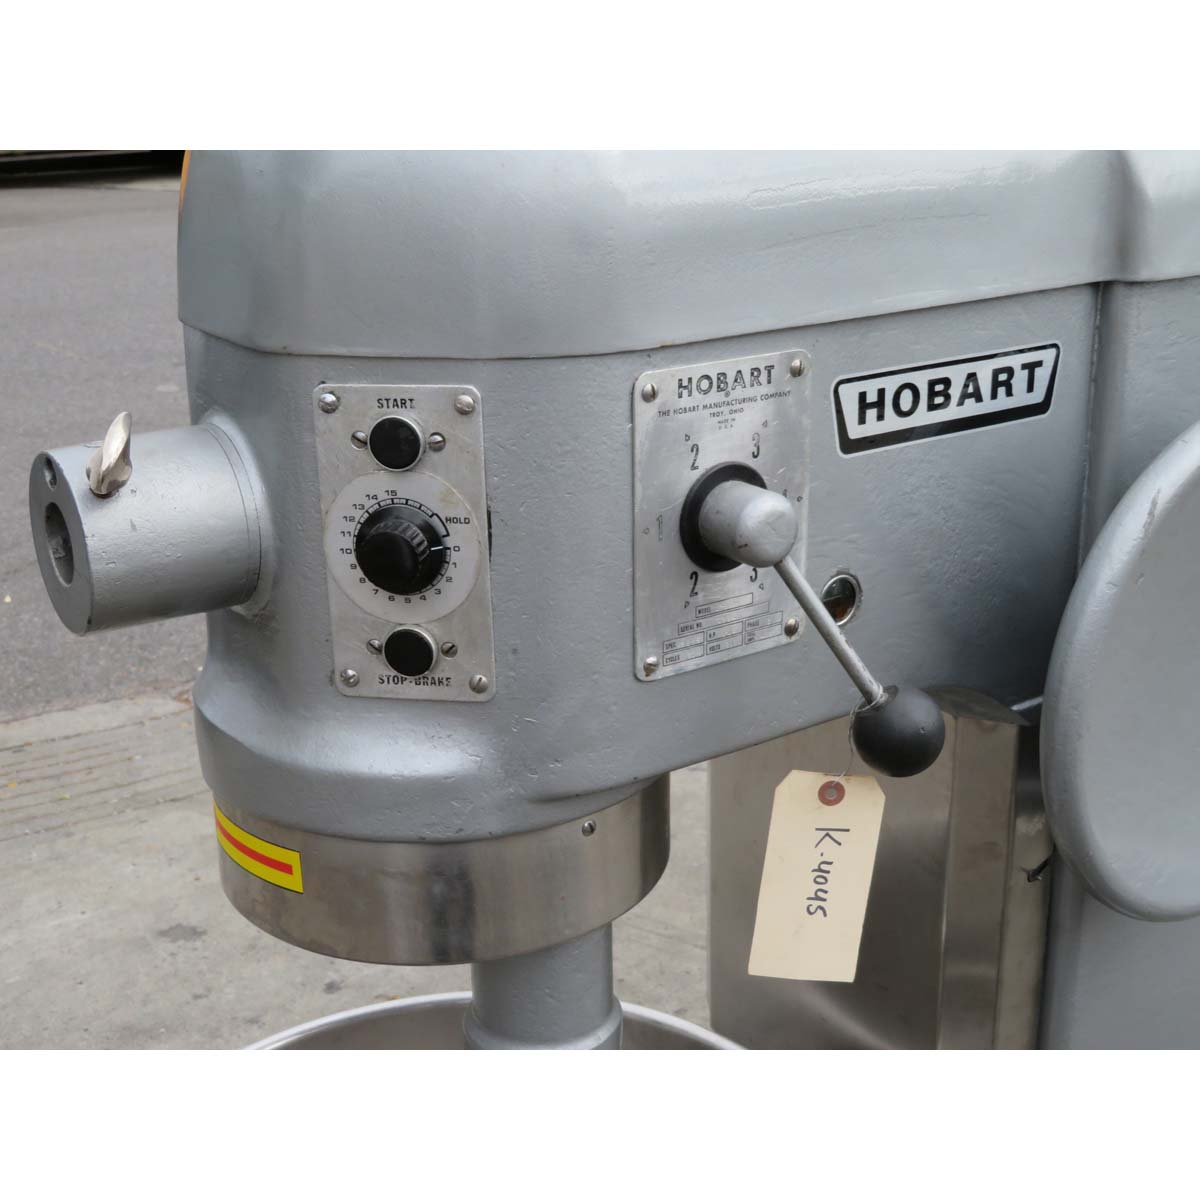 Hobart 80 Quart L800 Mixer, Used Great Condition image 1